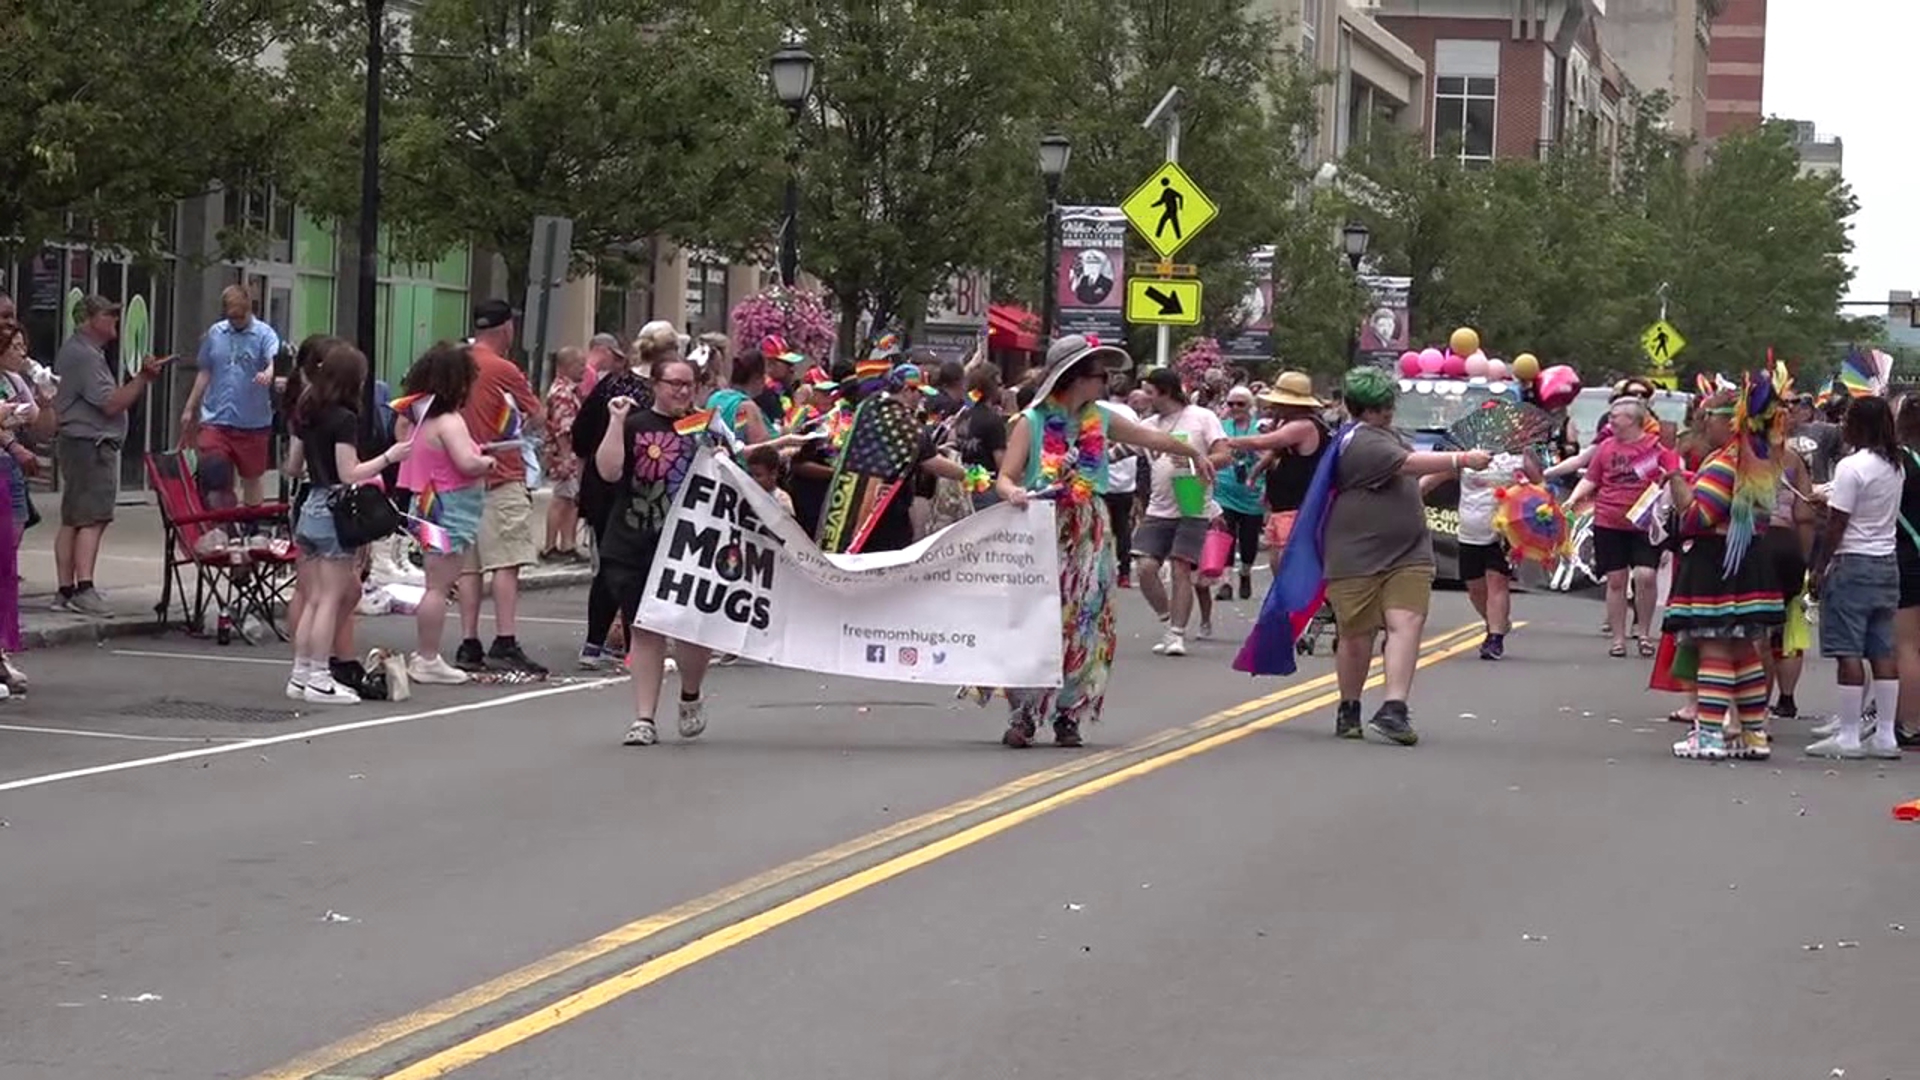 Wilkes-Barre is wrapping up Pride Month with its annual PrideFest on Public Square.